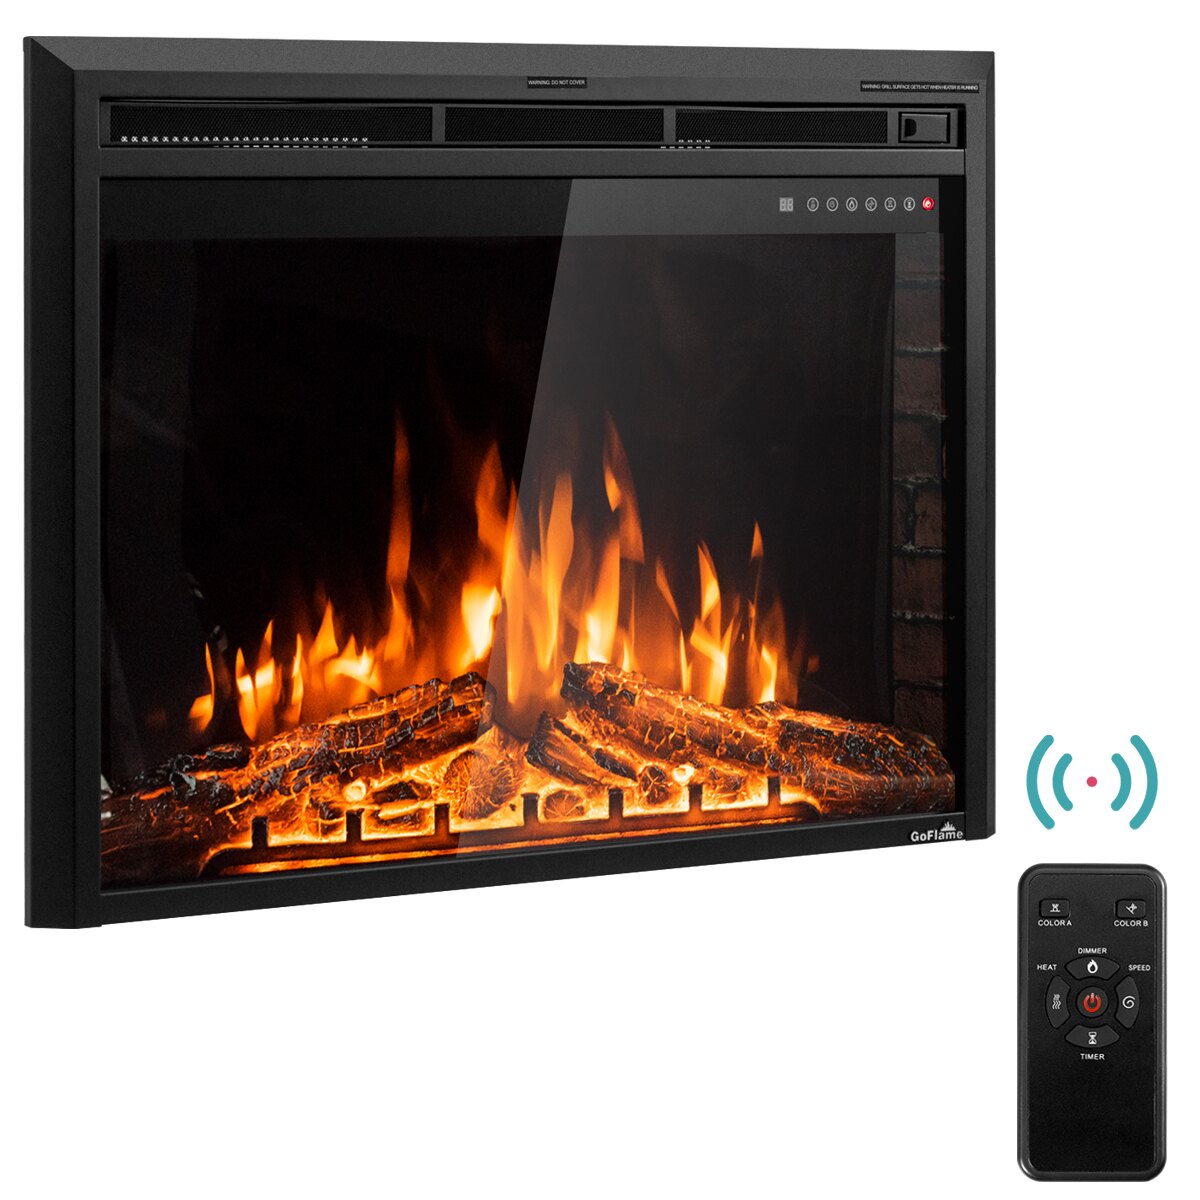 Natural Gas Fireplace Heater Fresh Goflame 36 750w 1500w Fireplace Heater Electric Embedded Insert Timer Flame Remote